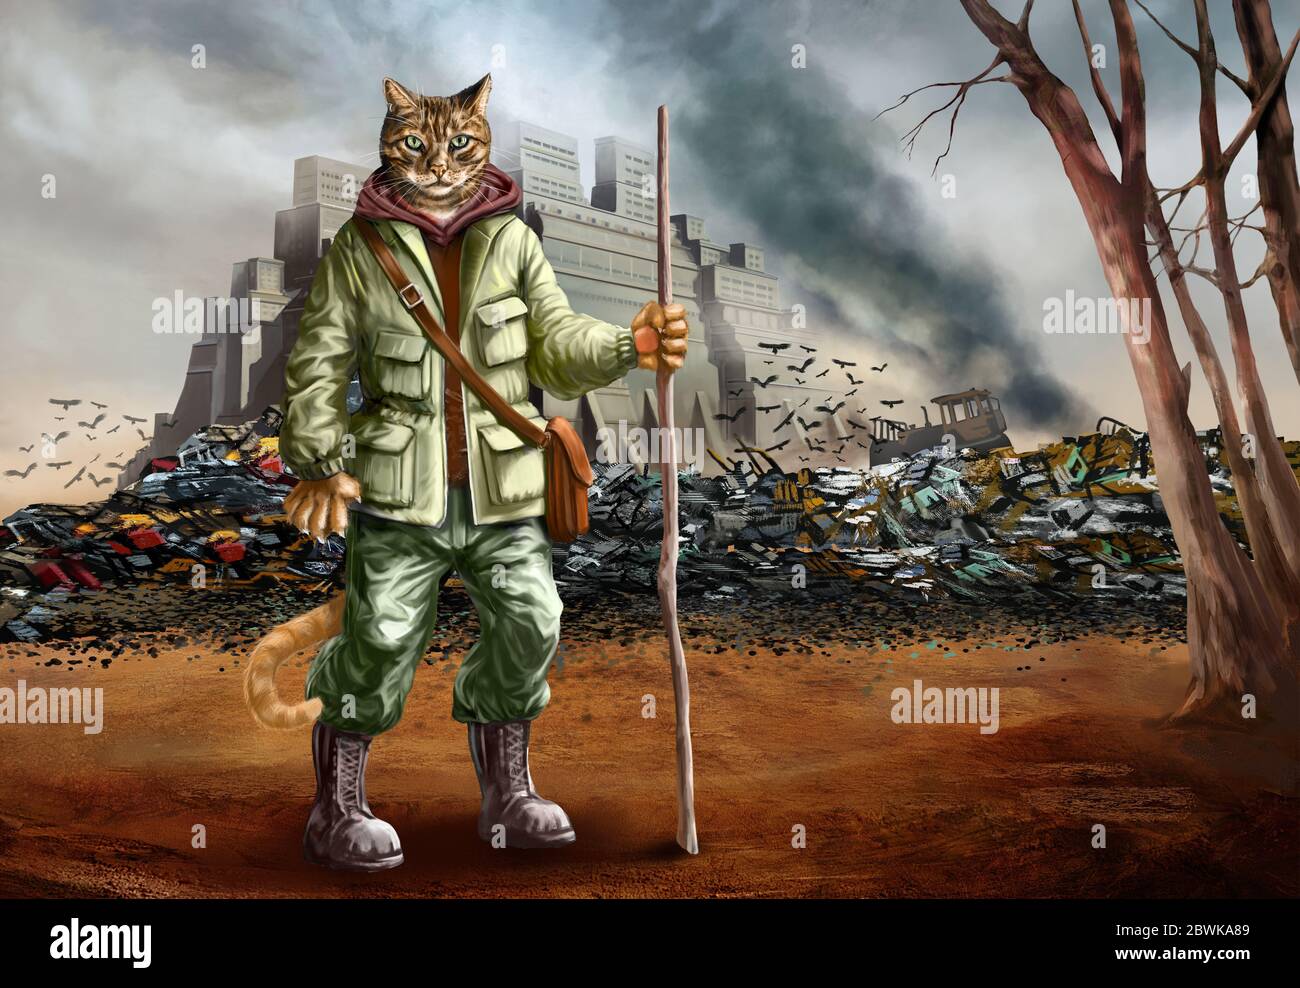 Apocalyptic puss in boots and apocalyptic landscape with castle and junkyard illustration Stock Photo